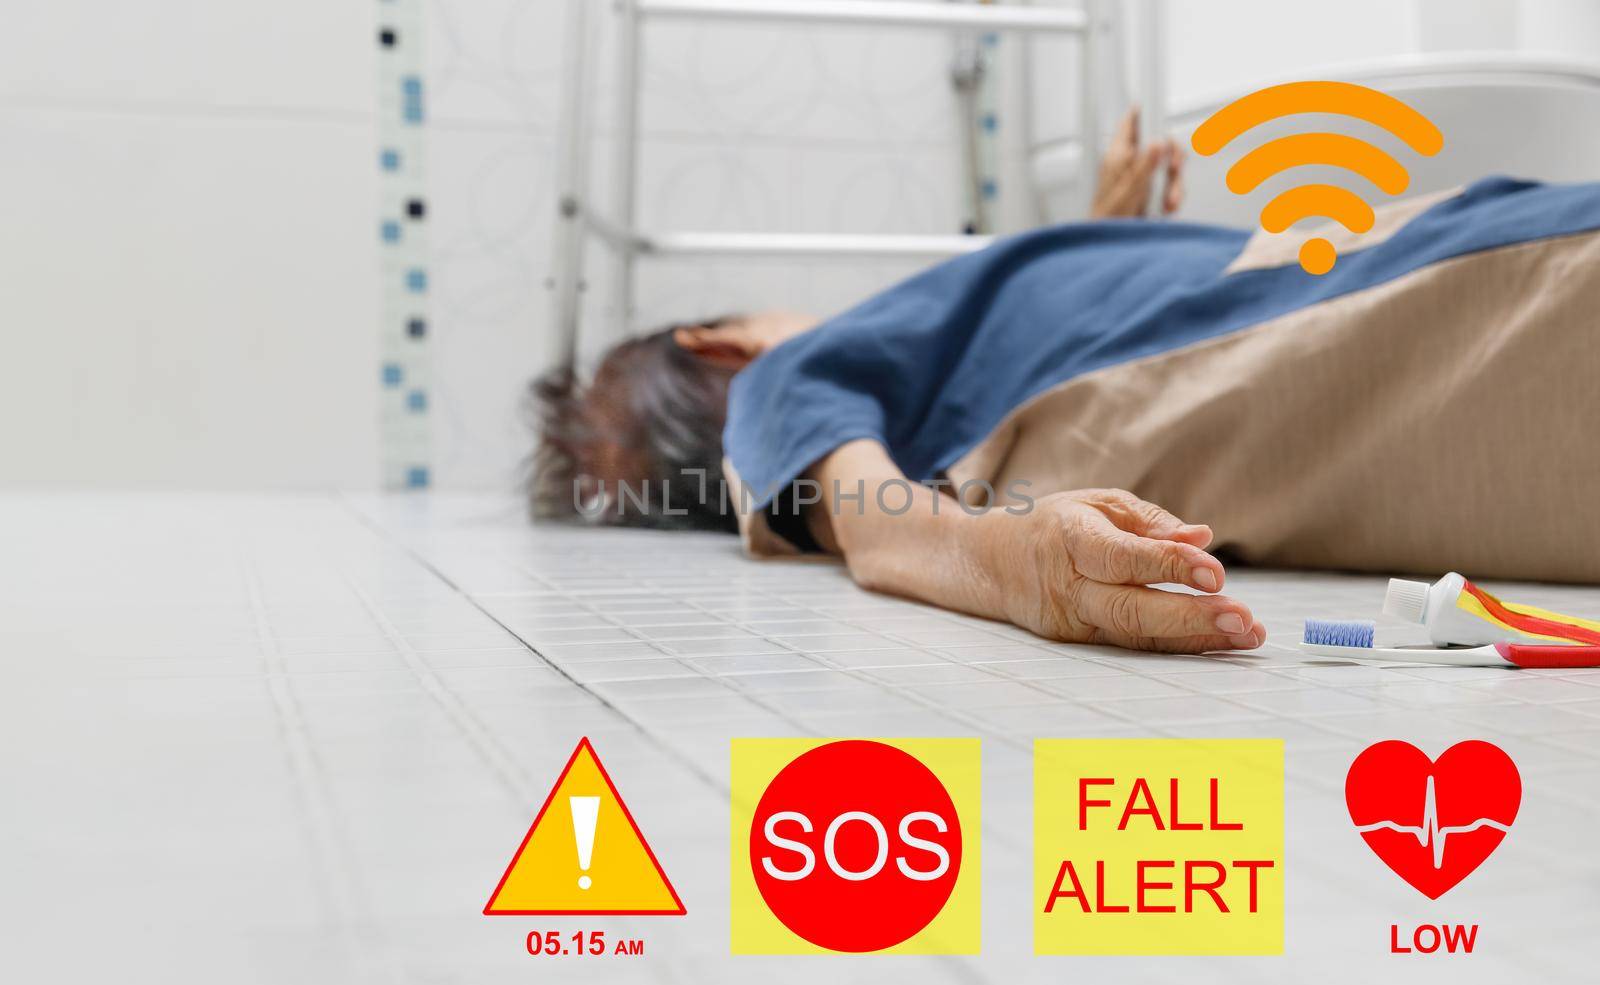 Medical fall accident detection is alert that elderly woman falling in bathroom because slippery surfaces